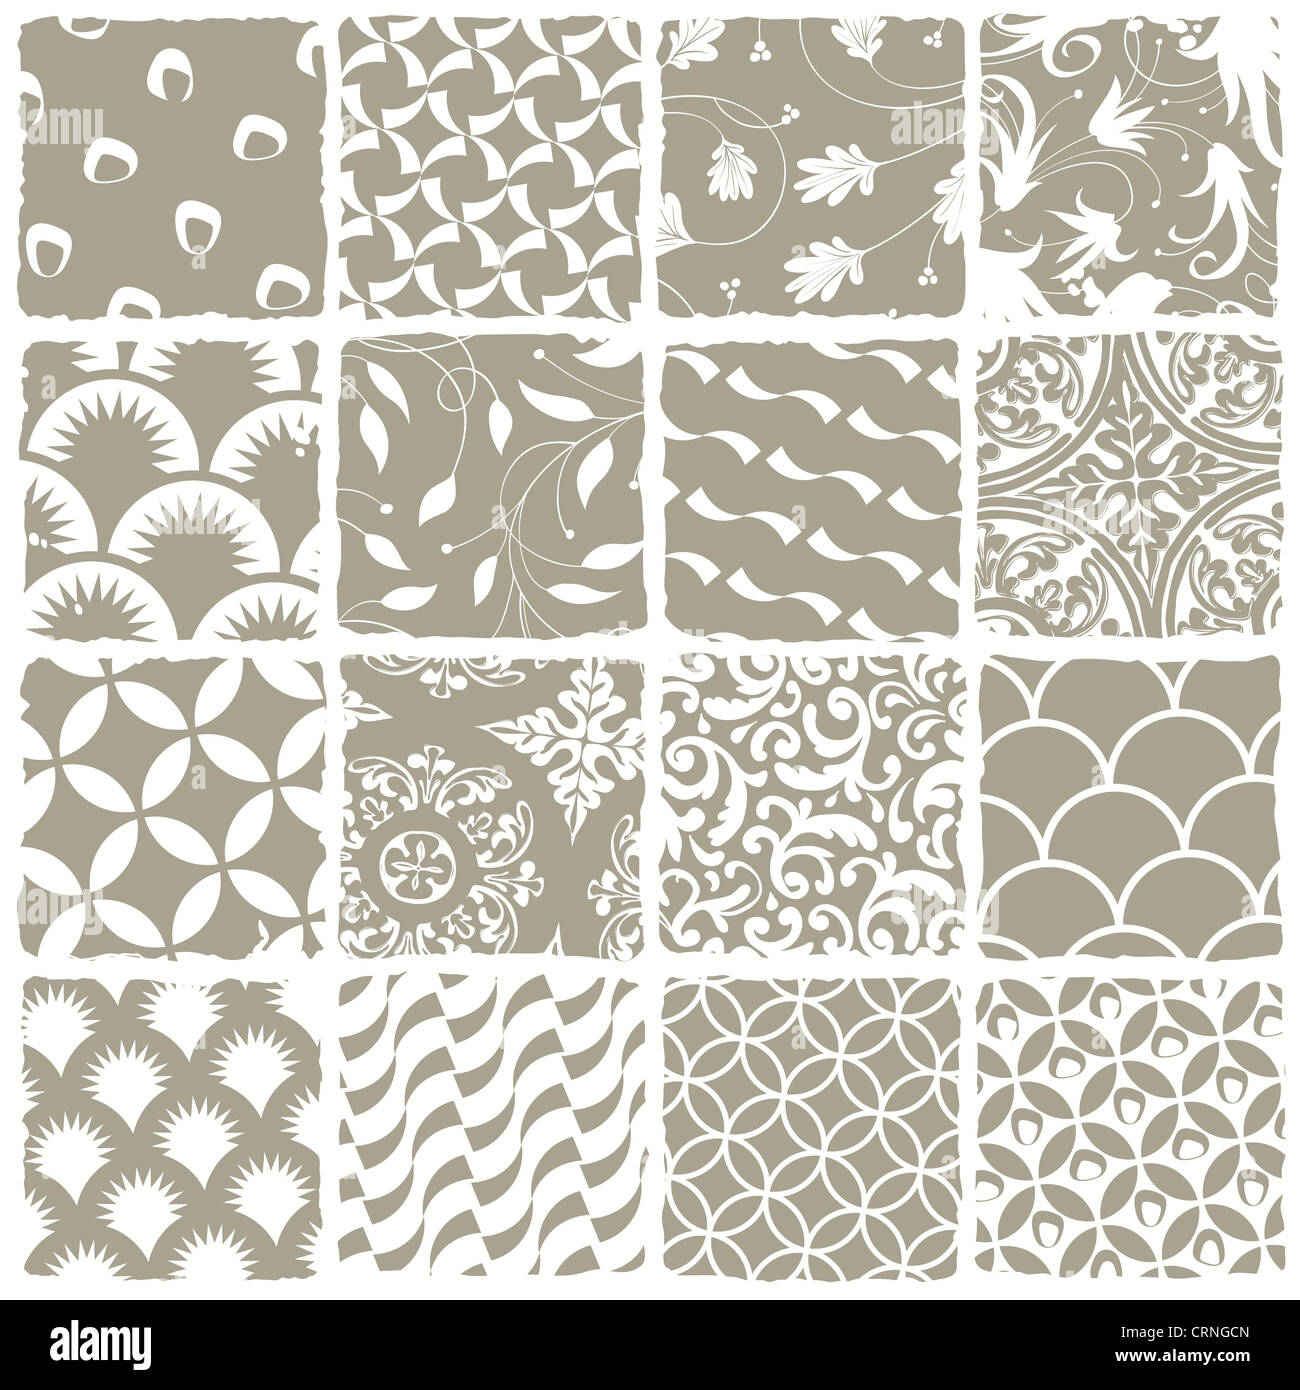 Variety styles seamless patterns set. All patterns available in swatch palette. Stock Photo